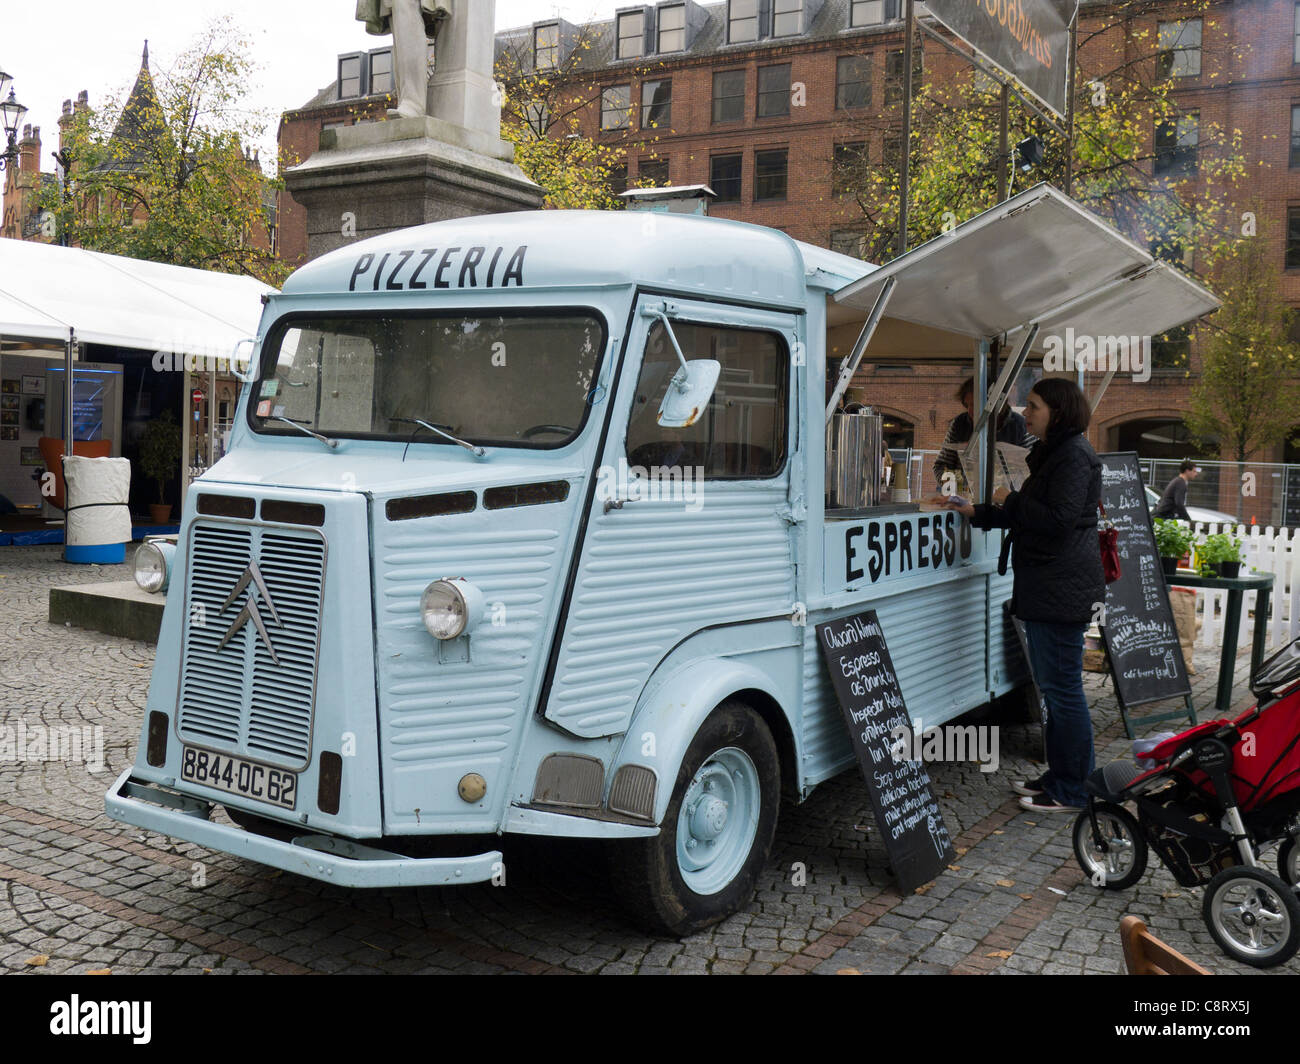 Vintage Citroen Van High Resolution Stock Photography and Images - Alamy